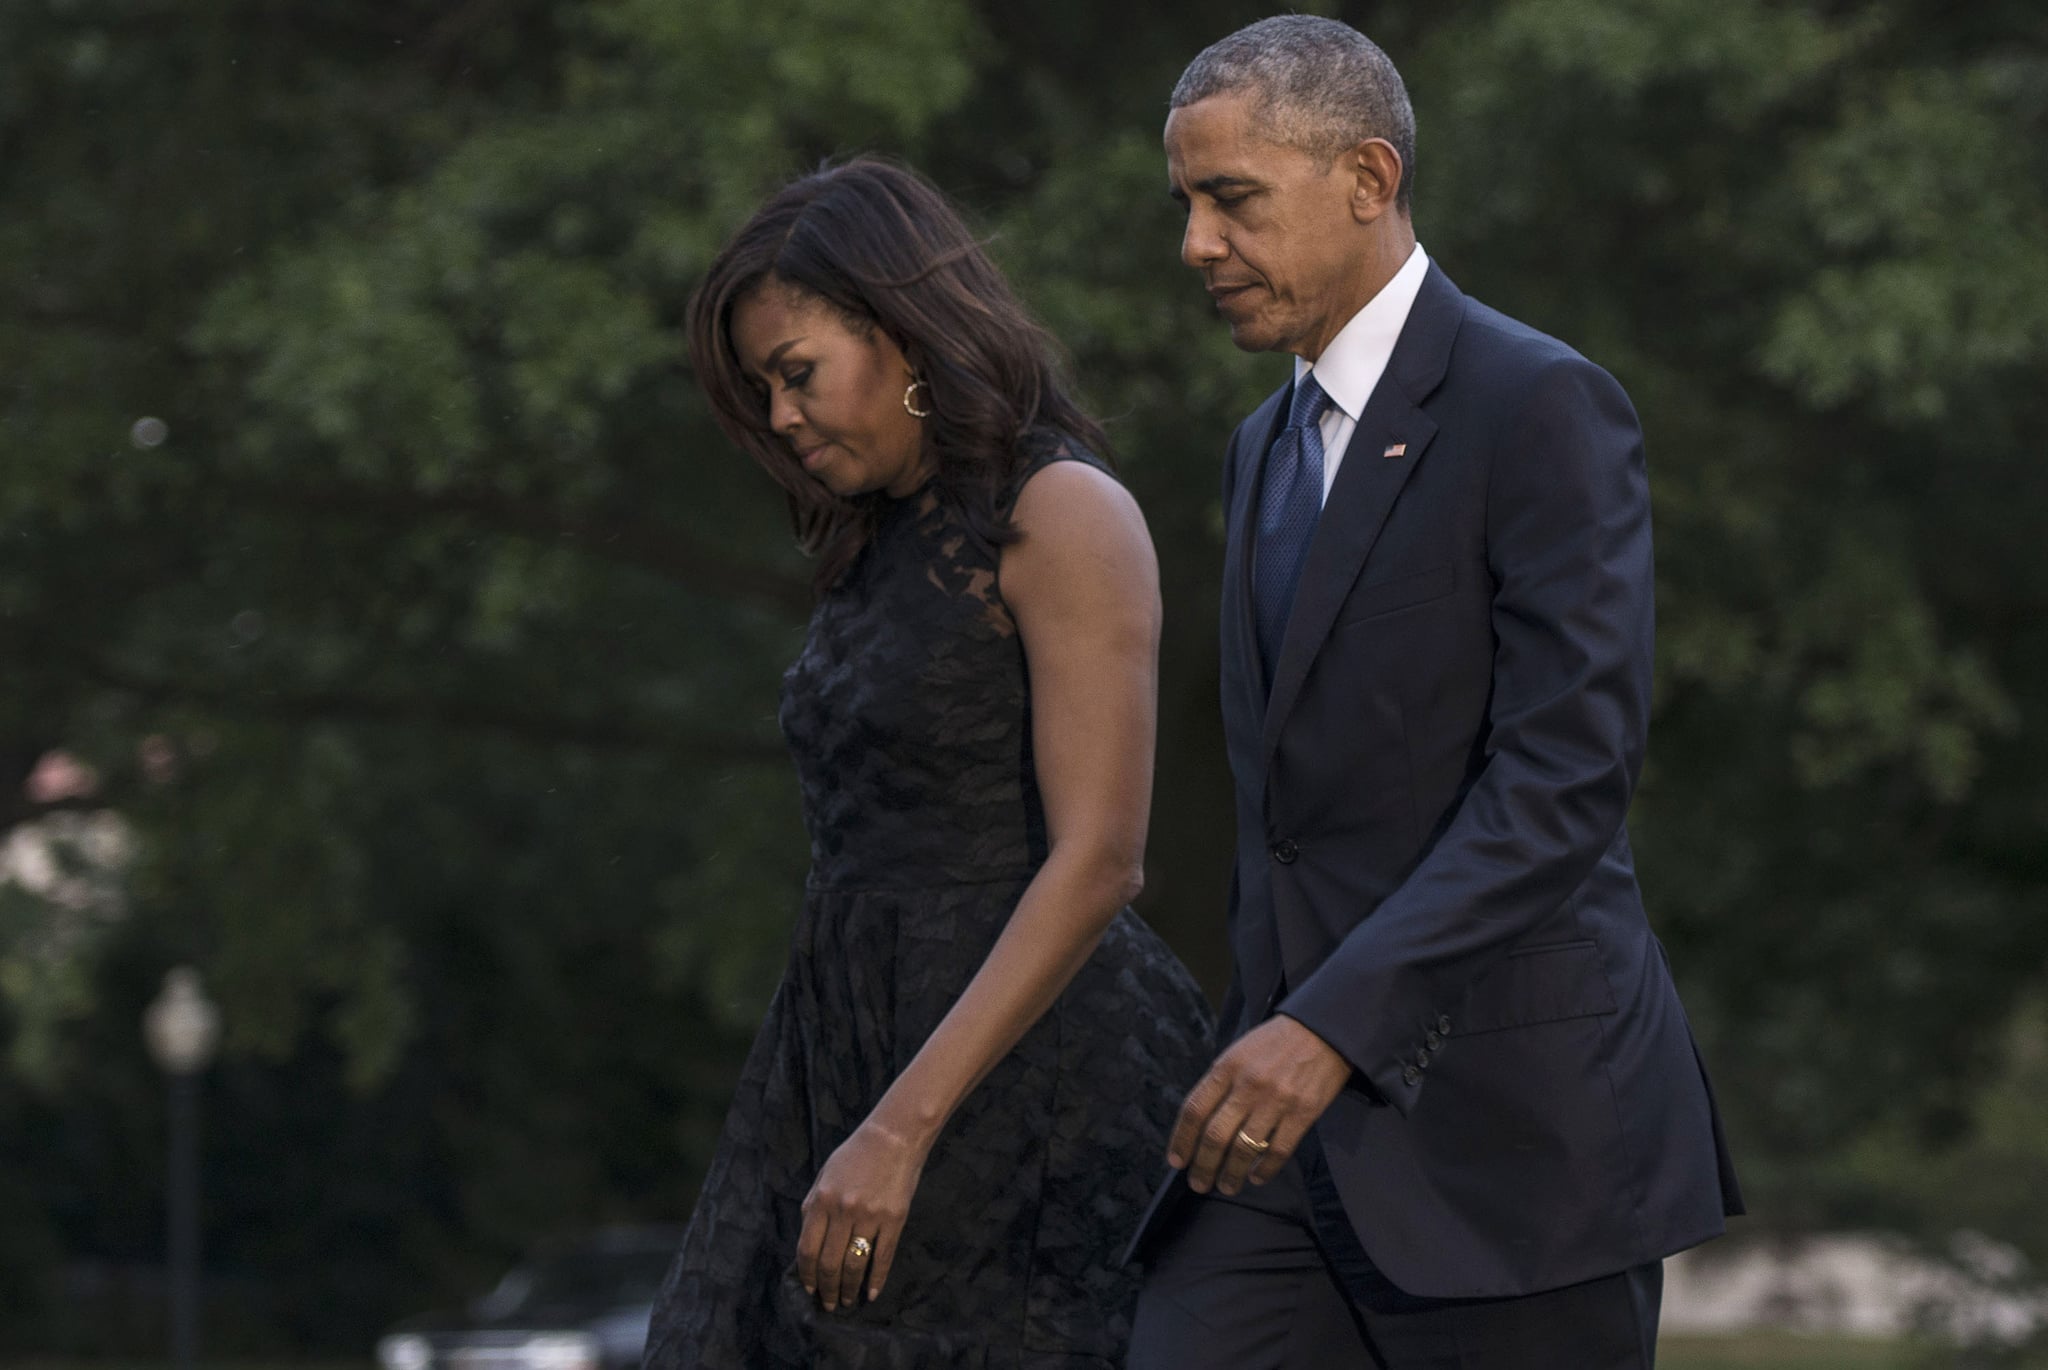 WASHINGTON, DC - JULY 12:  First Lady Michelle Obama and President Barack Obama depart Marine One after visiting Dallas, Texas, where the President delivered remarks at an interfaith service at the Morton H. Meyerson Symphony Centre with the families of the fallen police officers and members of the Dallas community at The White House on July 12, 2016 in Washington, DC.  (Photo by Leigh Vogel/WireImage)